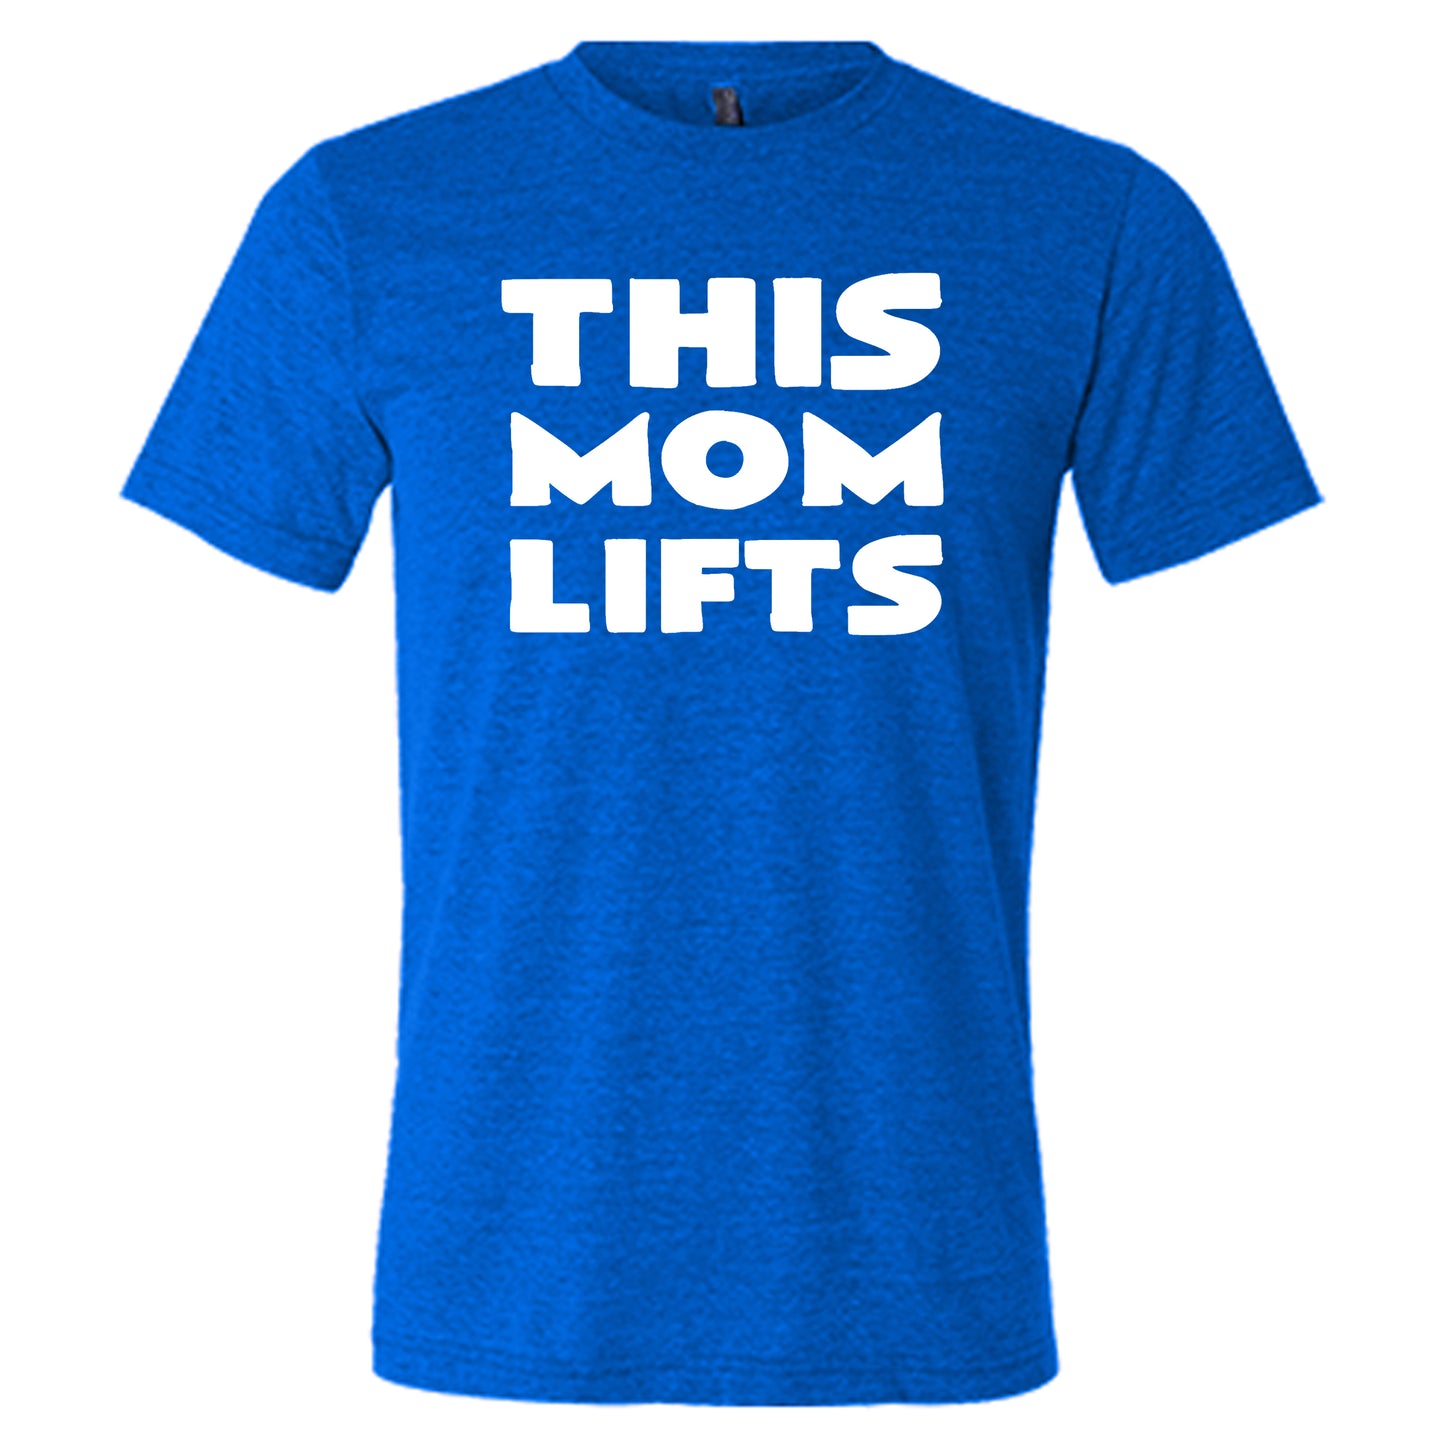 blue unisex tee shirt with the saying "this mom lifts" in the center in white lettering